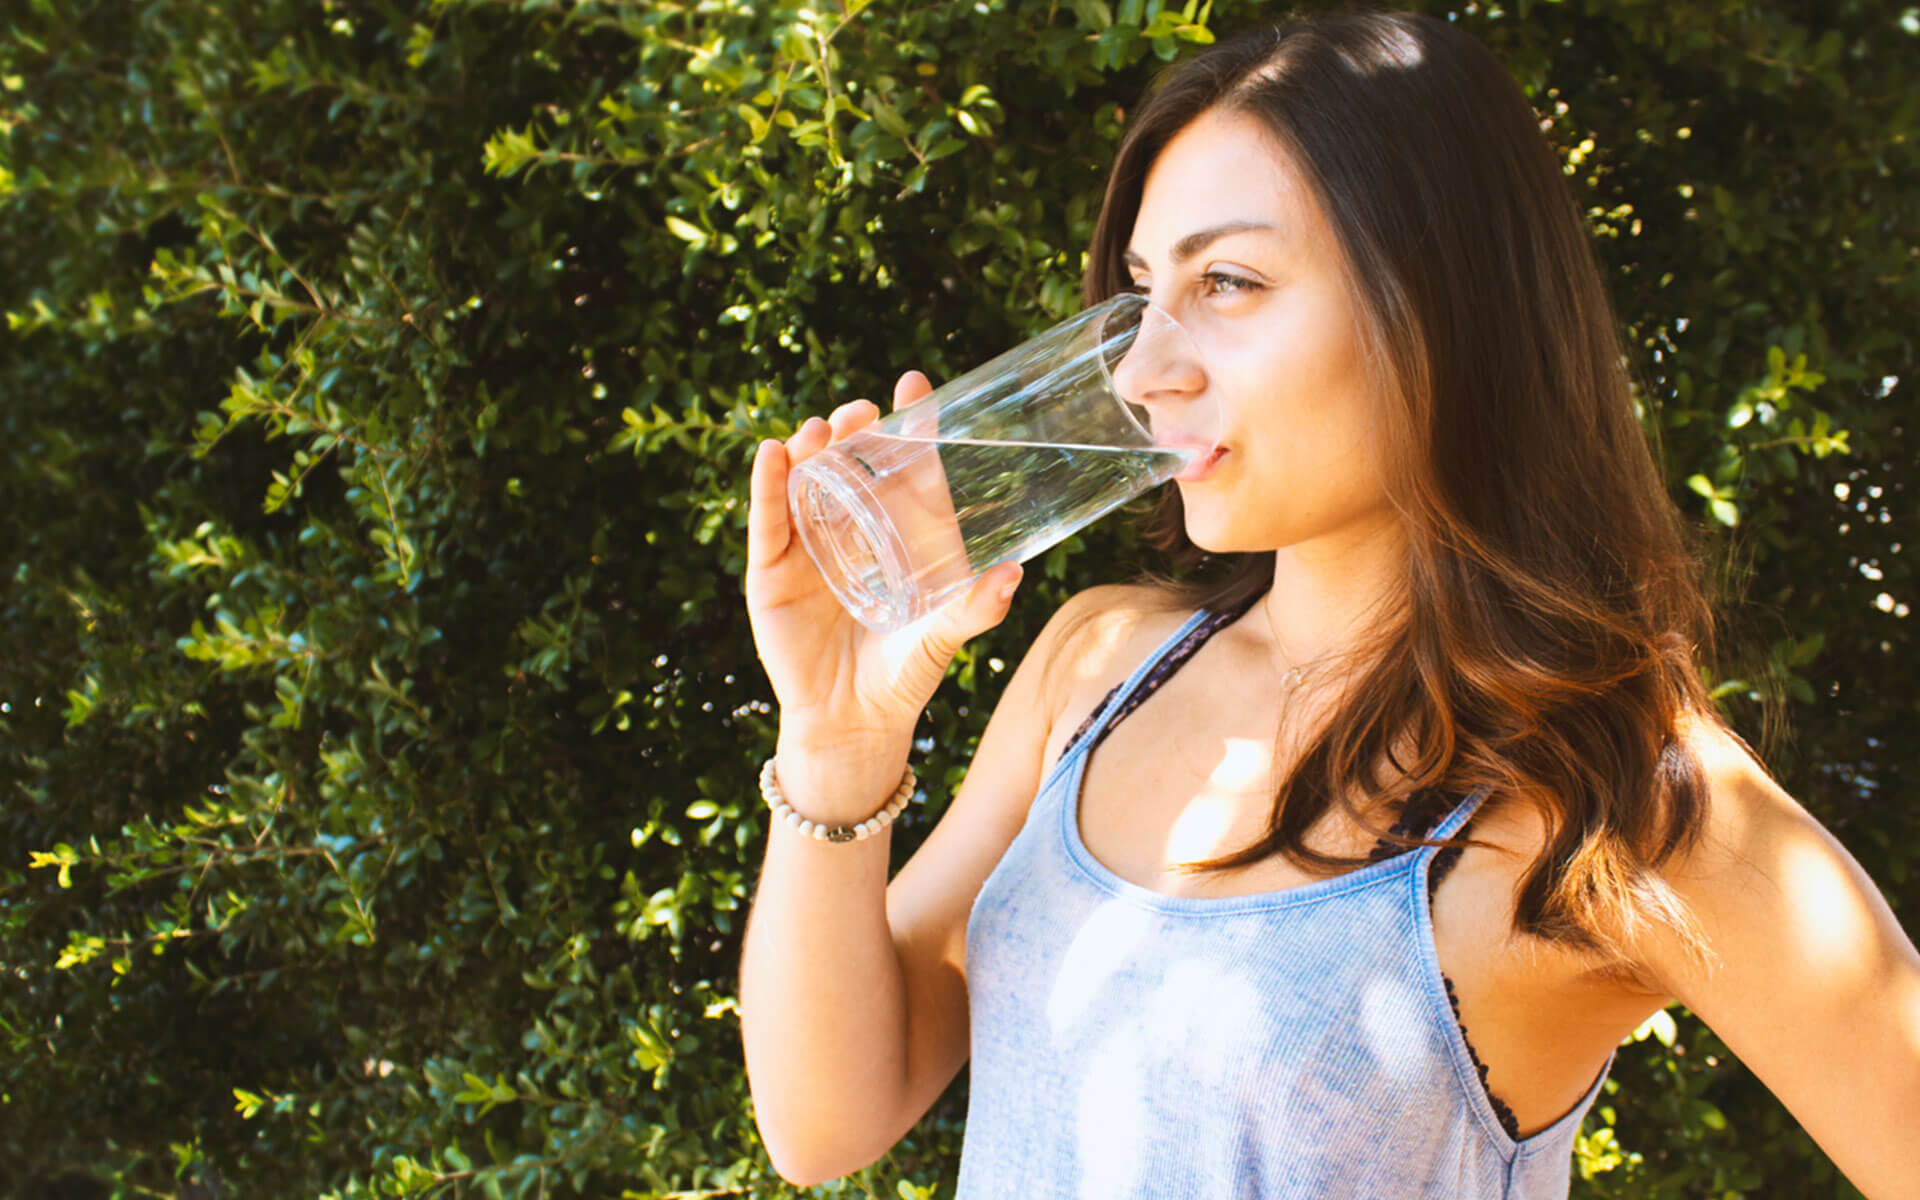 woman with dark hair drinking a glass of water